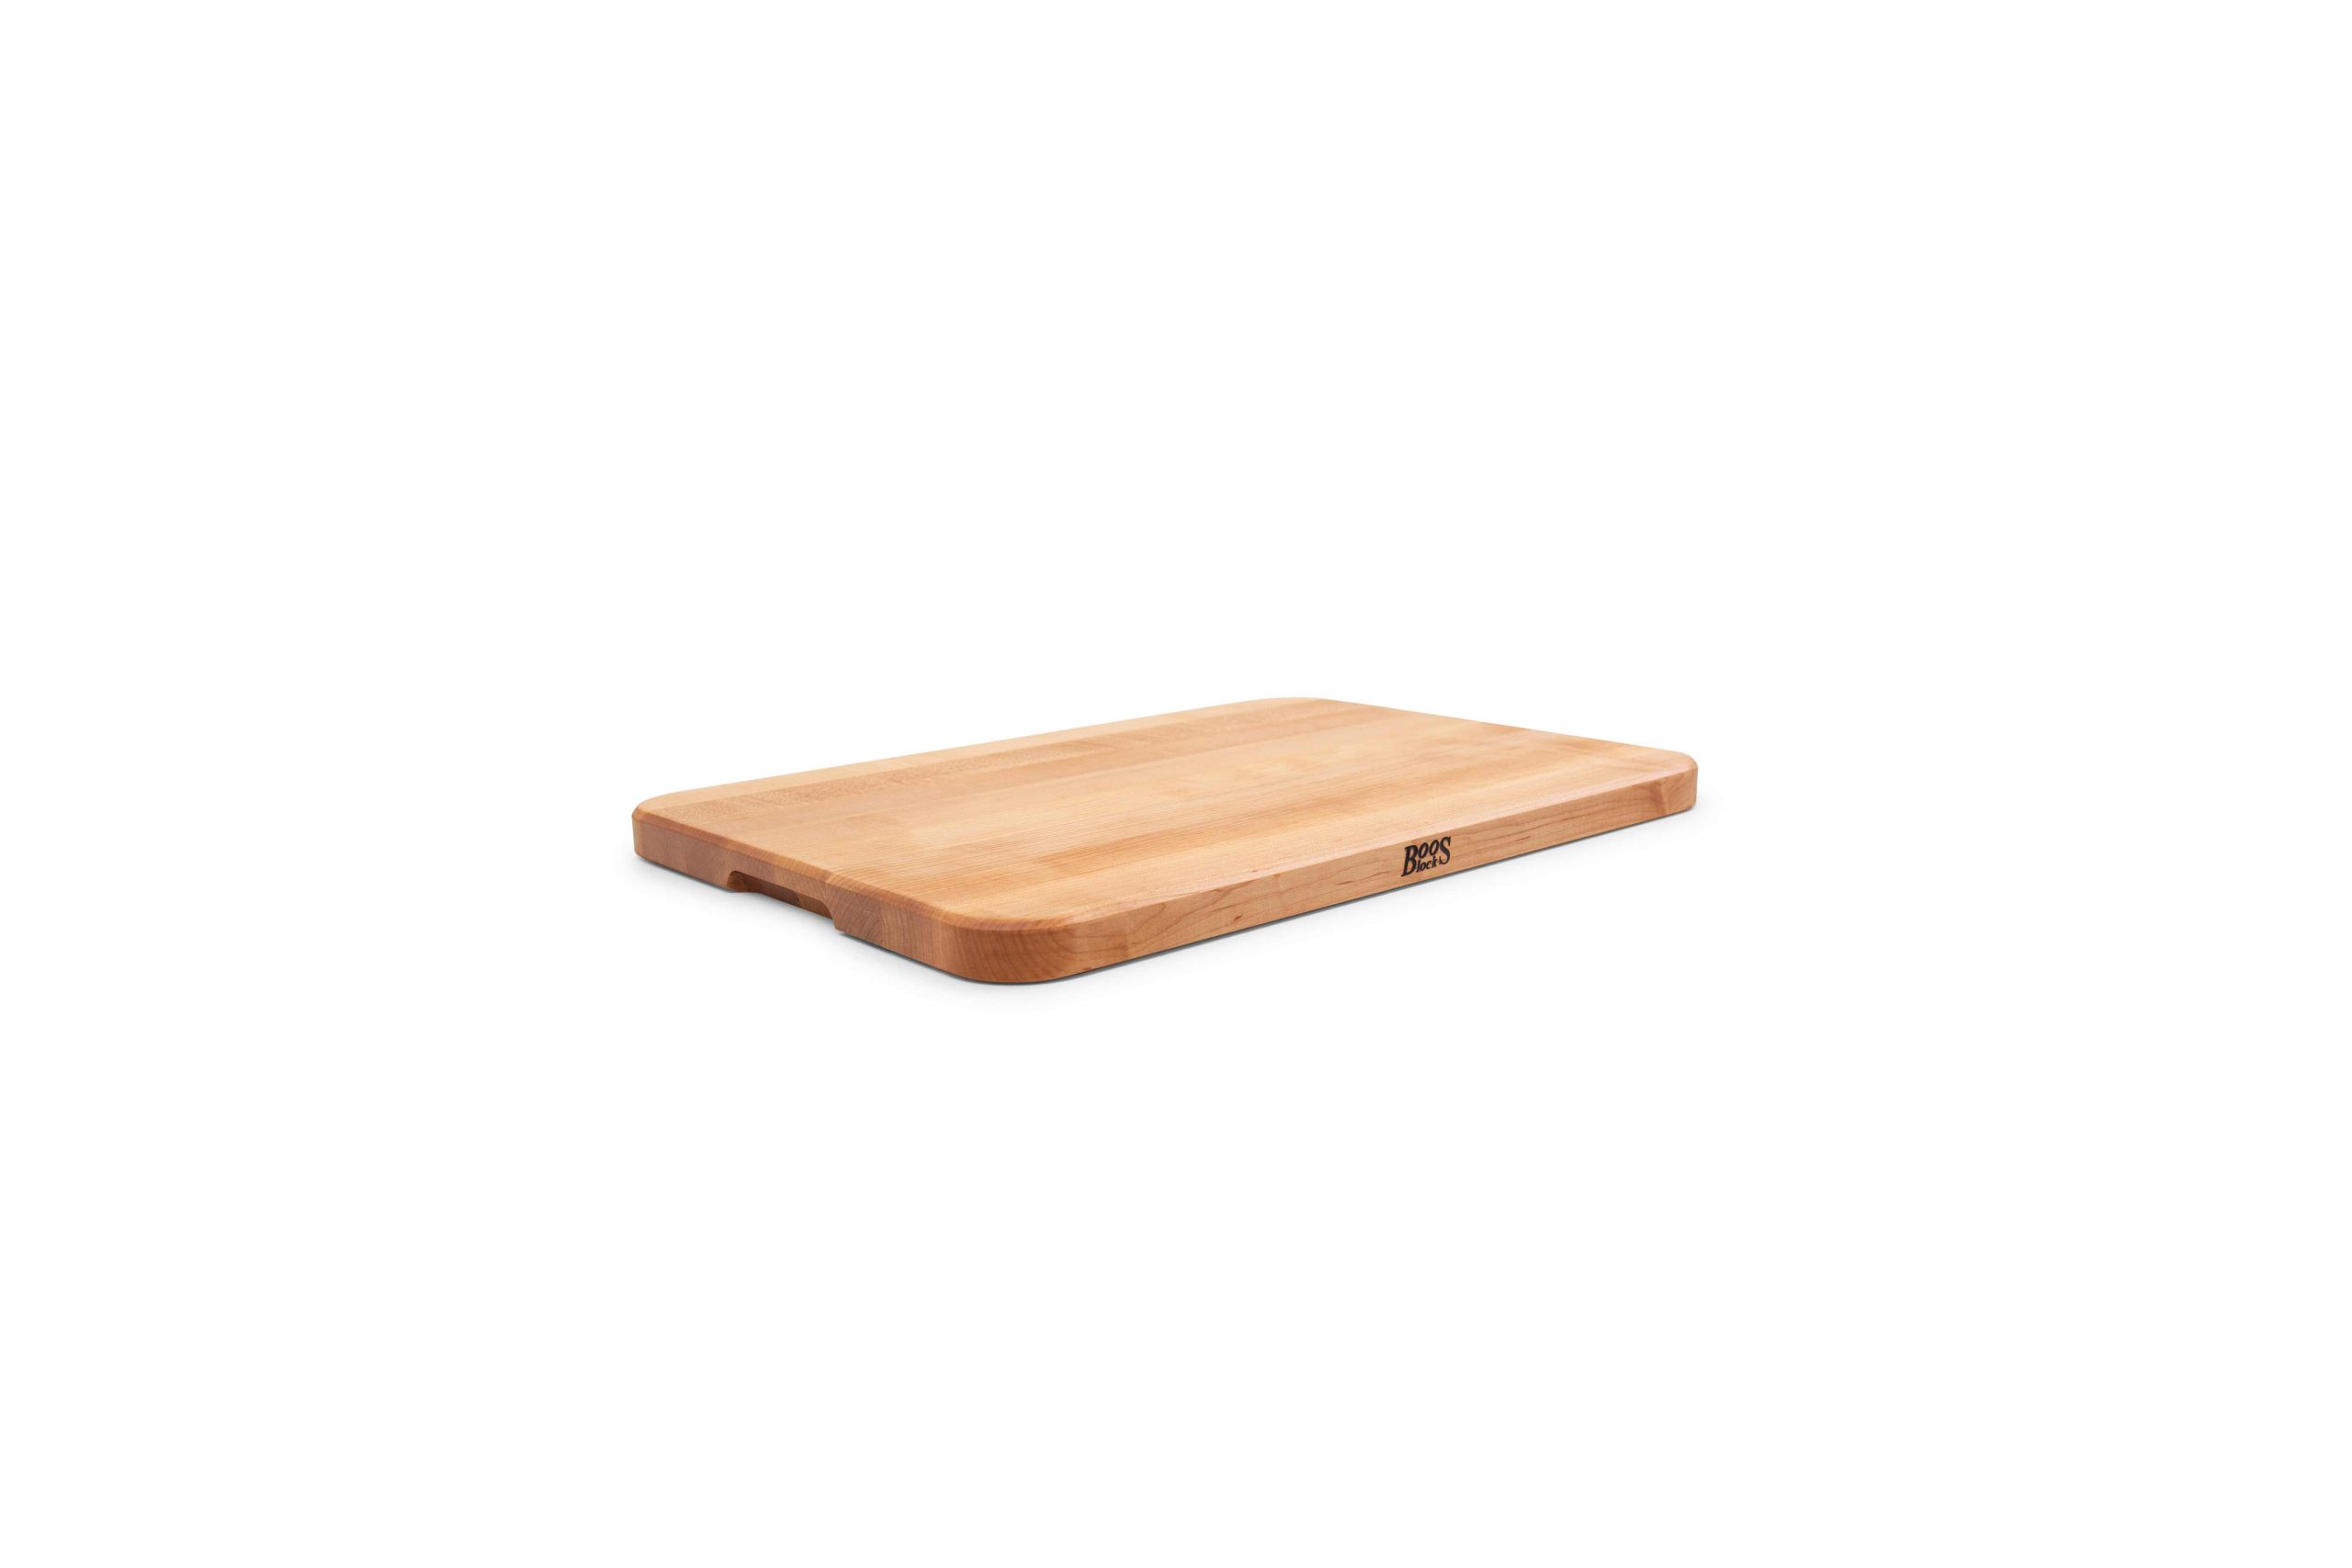 Chop-N-Serve Hard Maple Cutting Board with recessed grip; can be used on both sides 13